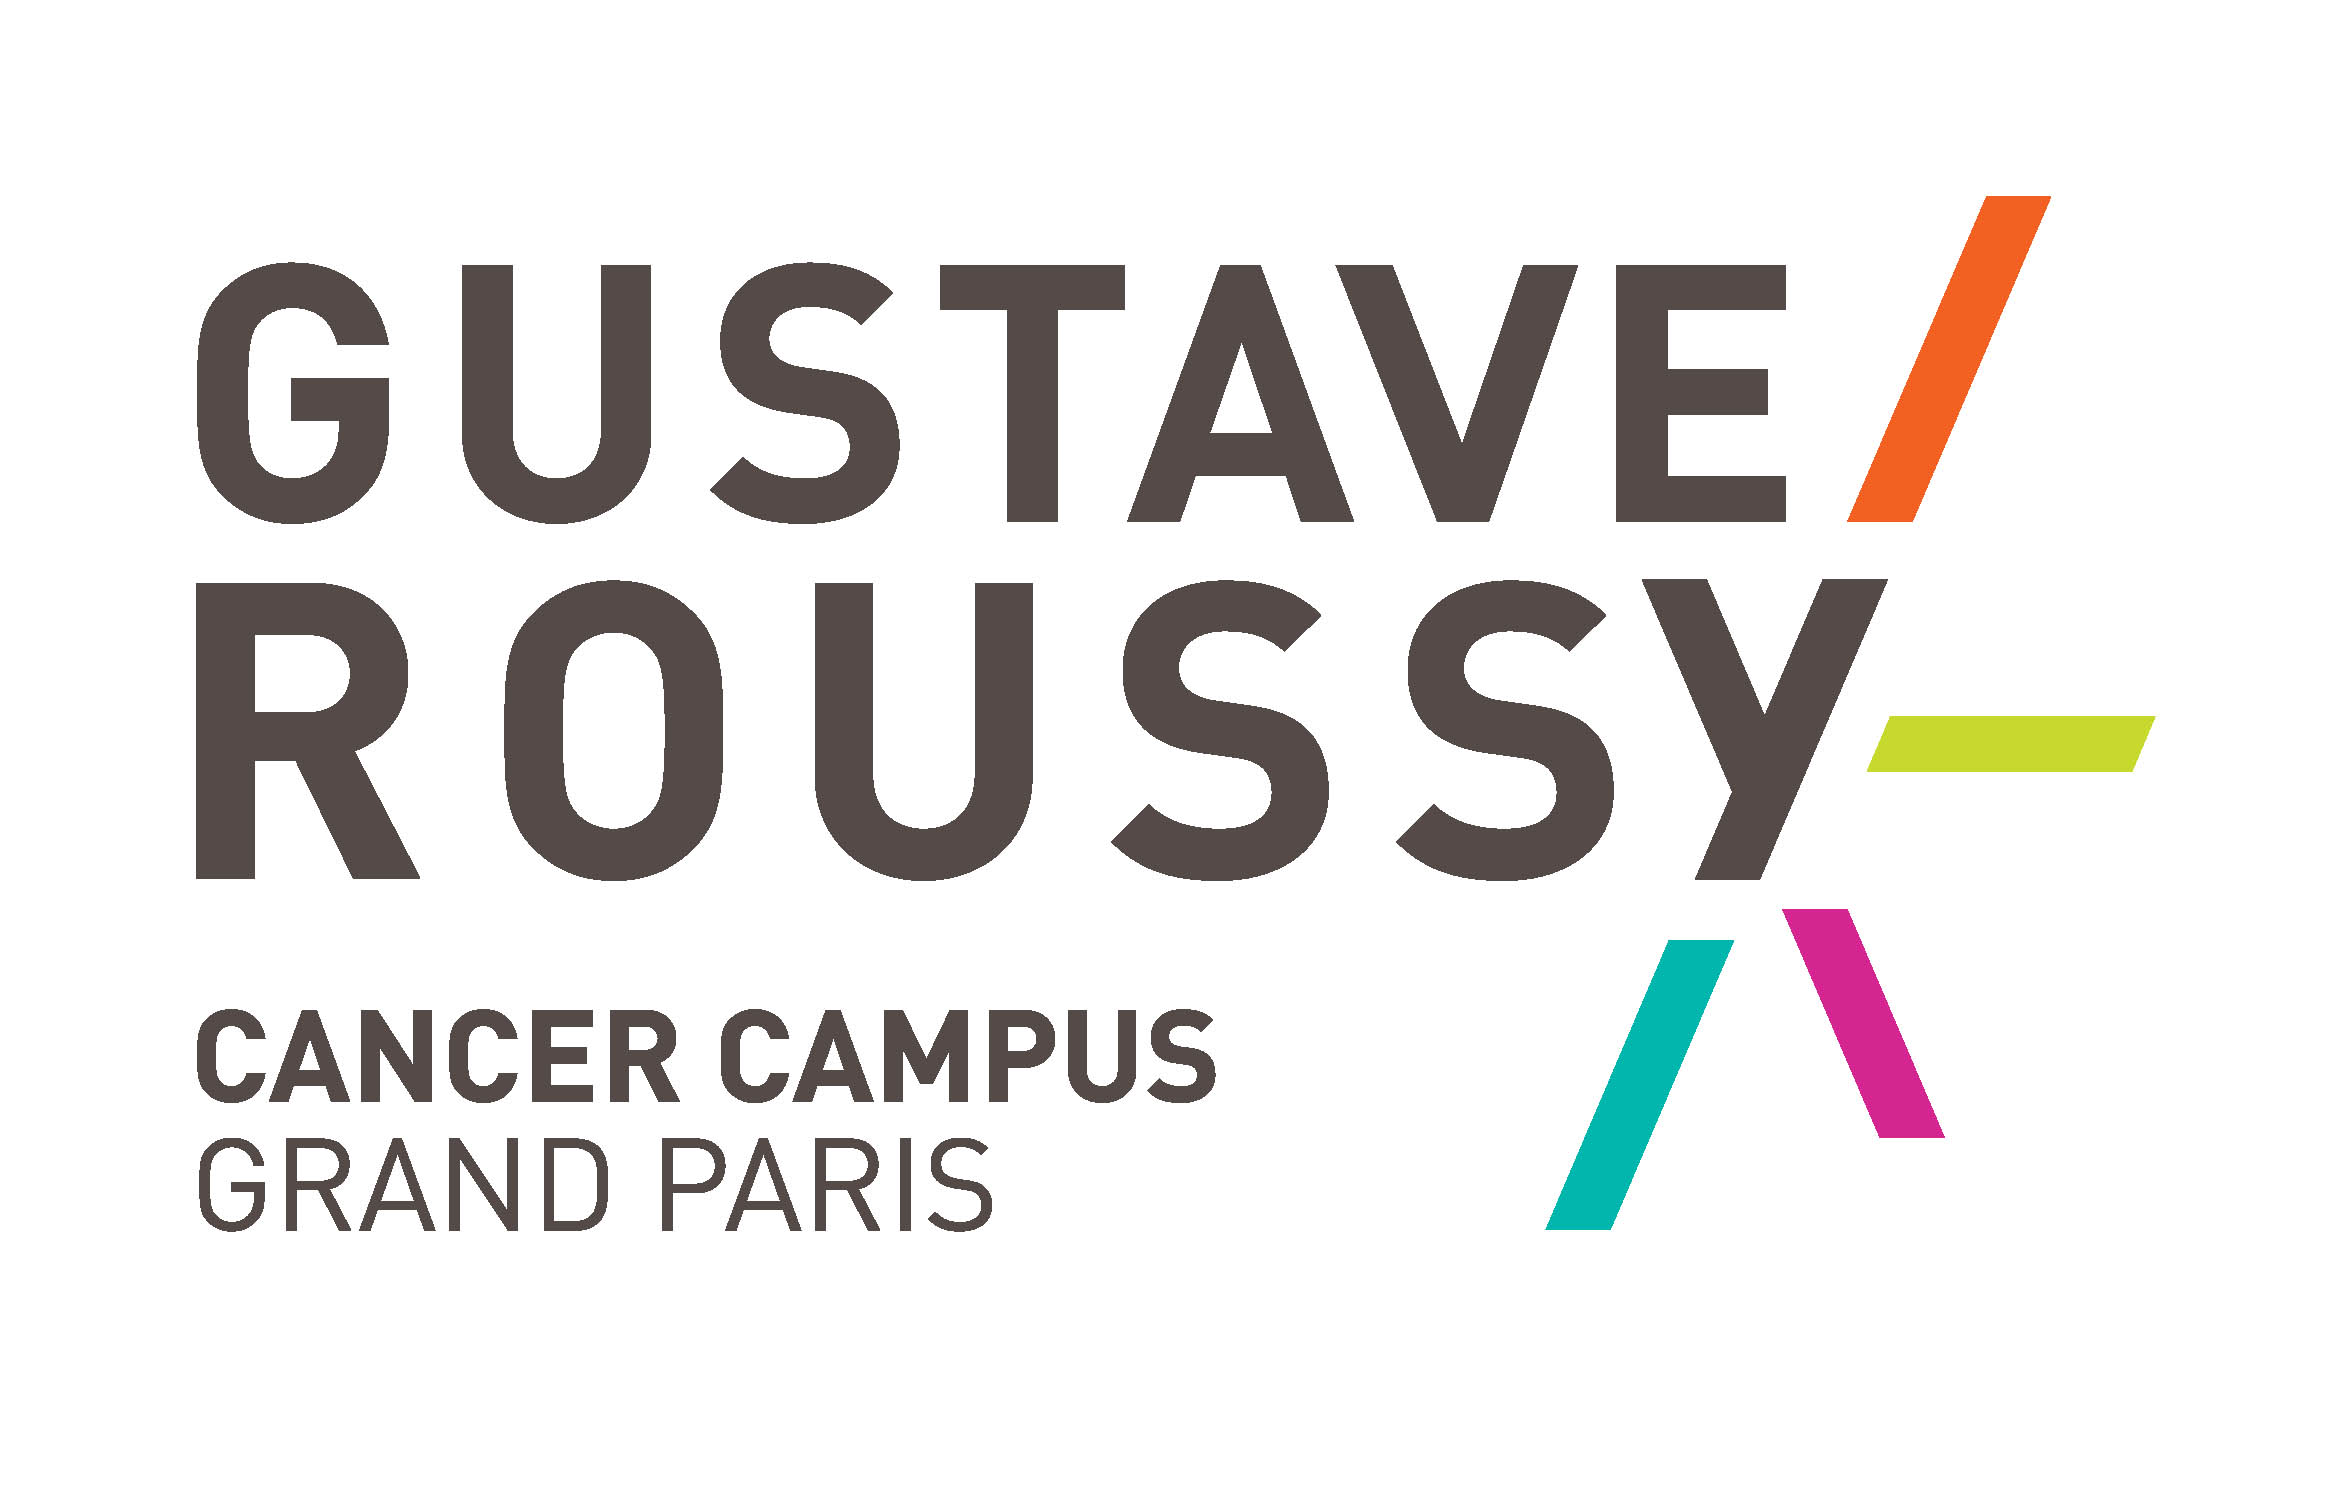 Voyages solidaire avec Gustave roussy 